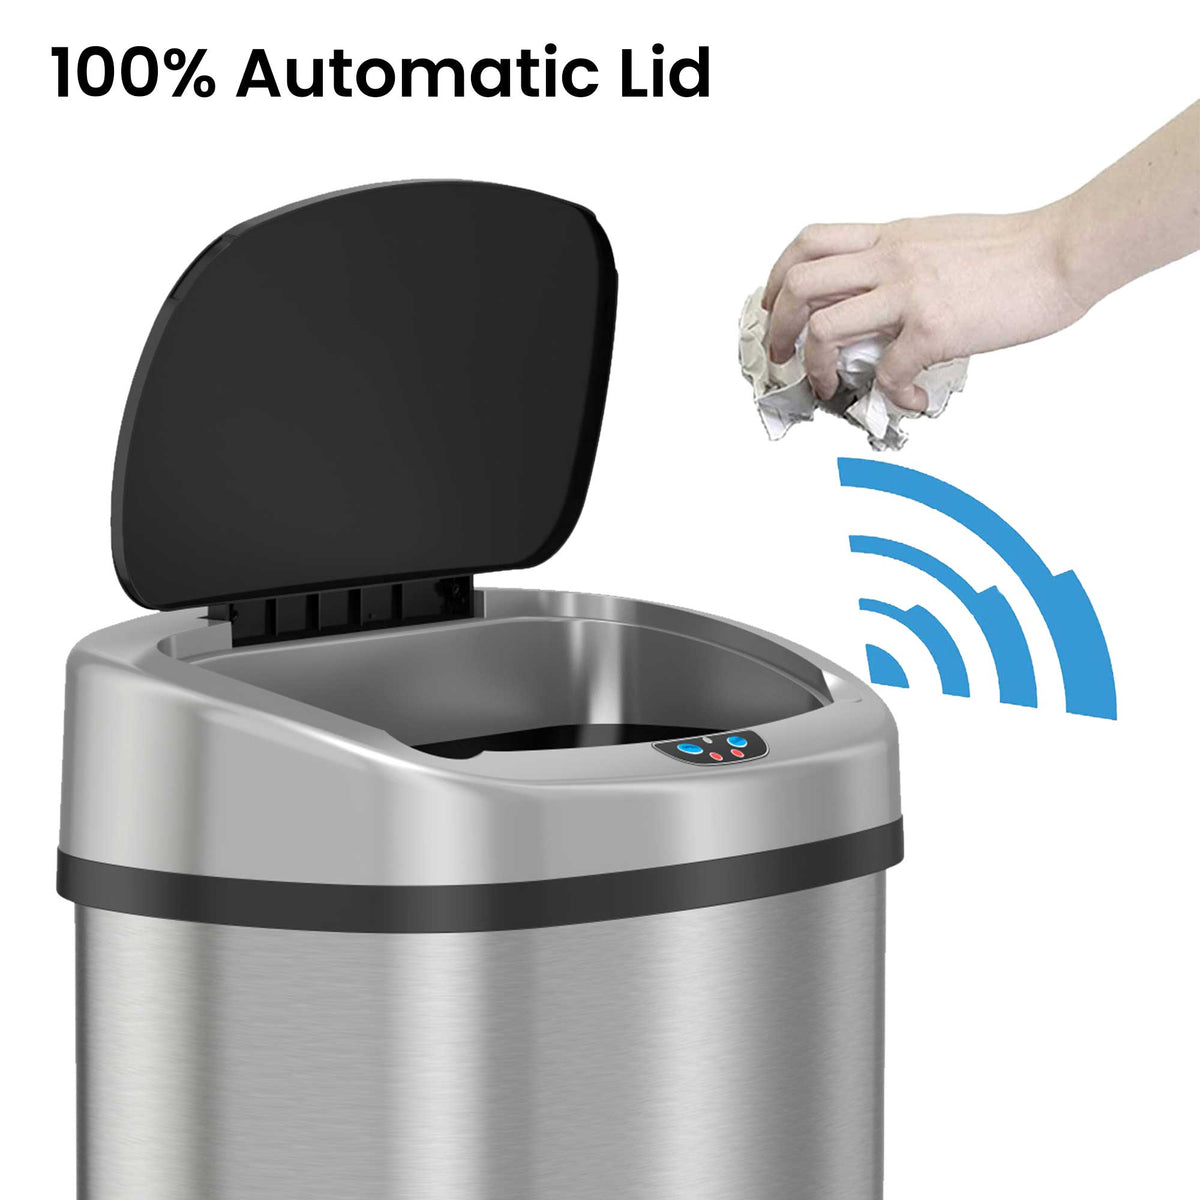 iTouchless 13 Gallon Stainless Steel Rolling Sensor Trash Can with Wheels and Odor Filter 100% Automatic Lid